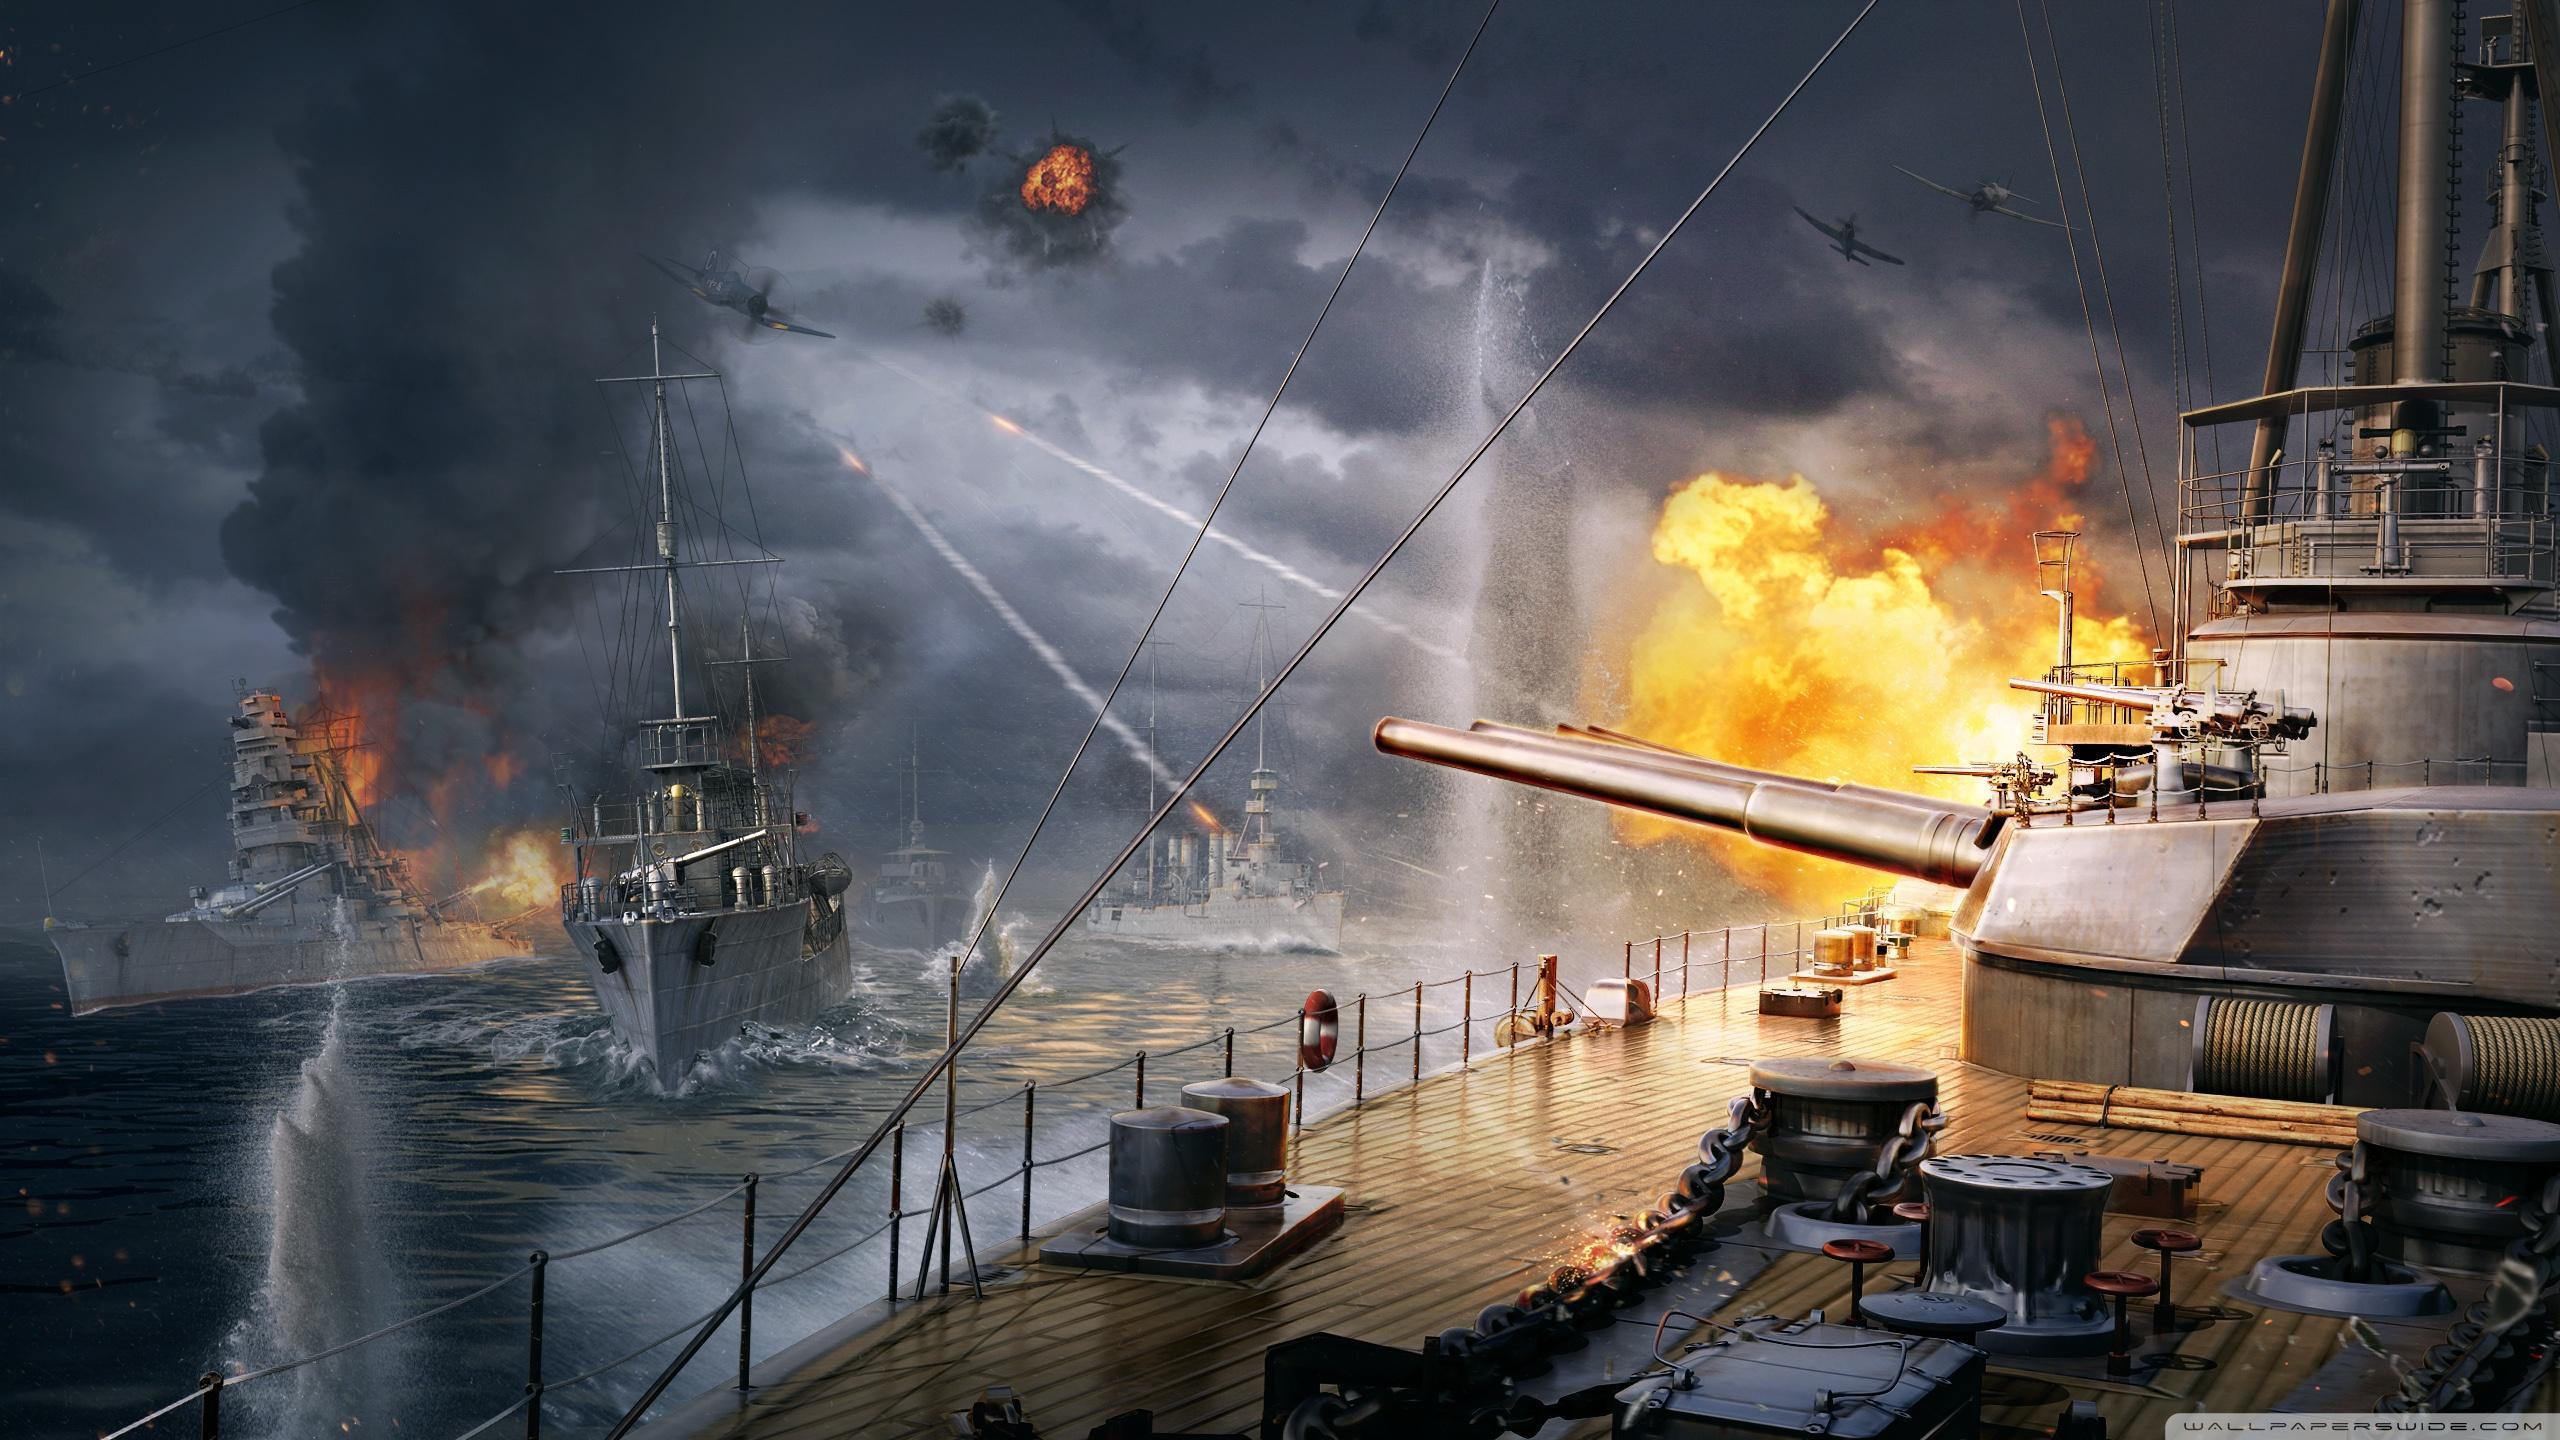 Download Warship Wallpaper Wallpaper For your screen